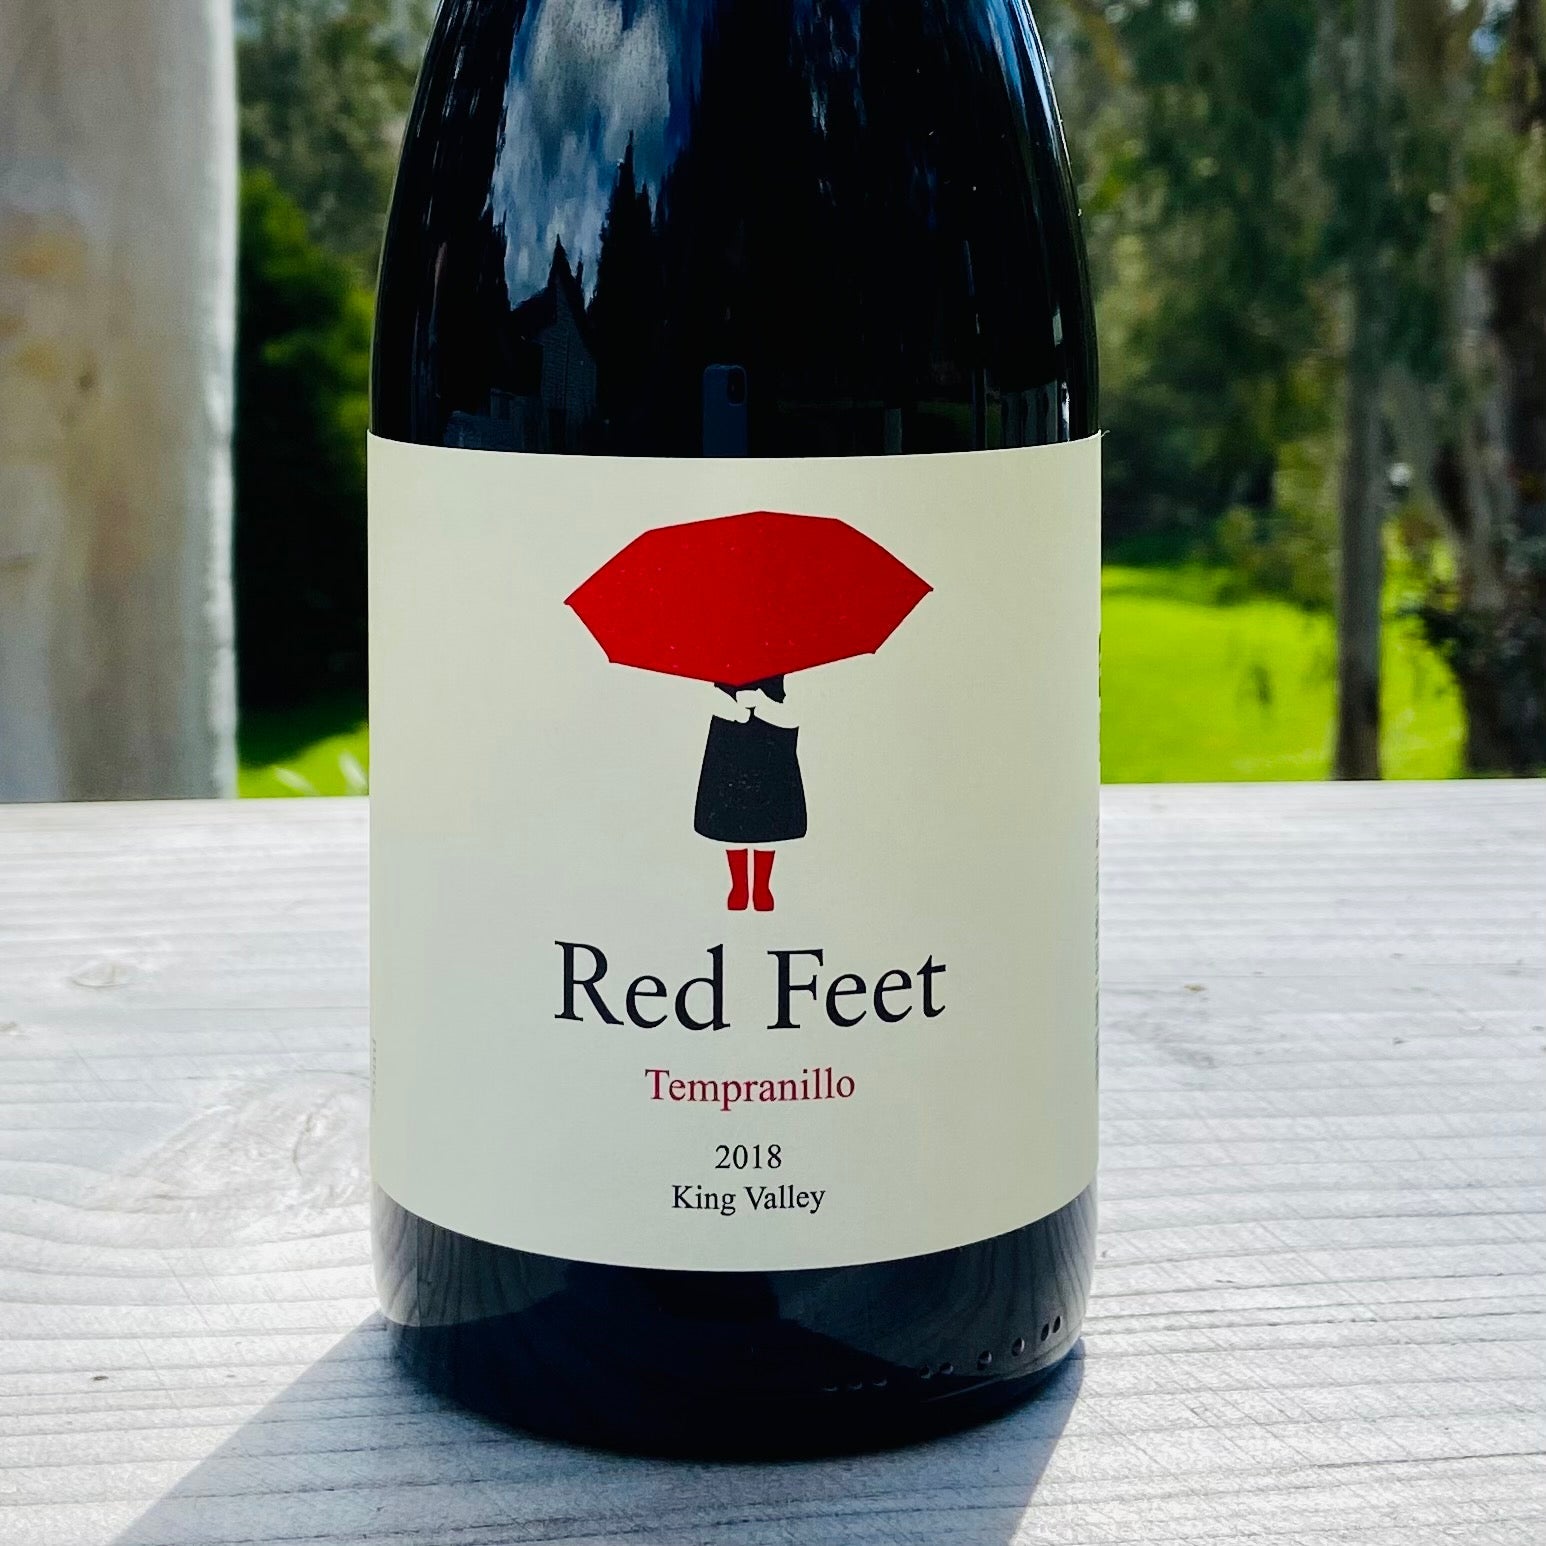 King Valley Wine, Red Feet Tempranillo